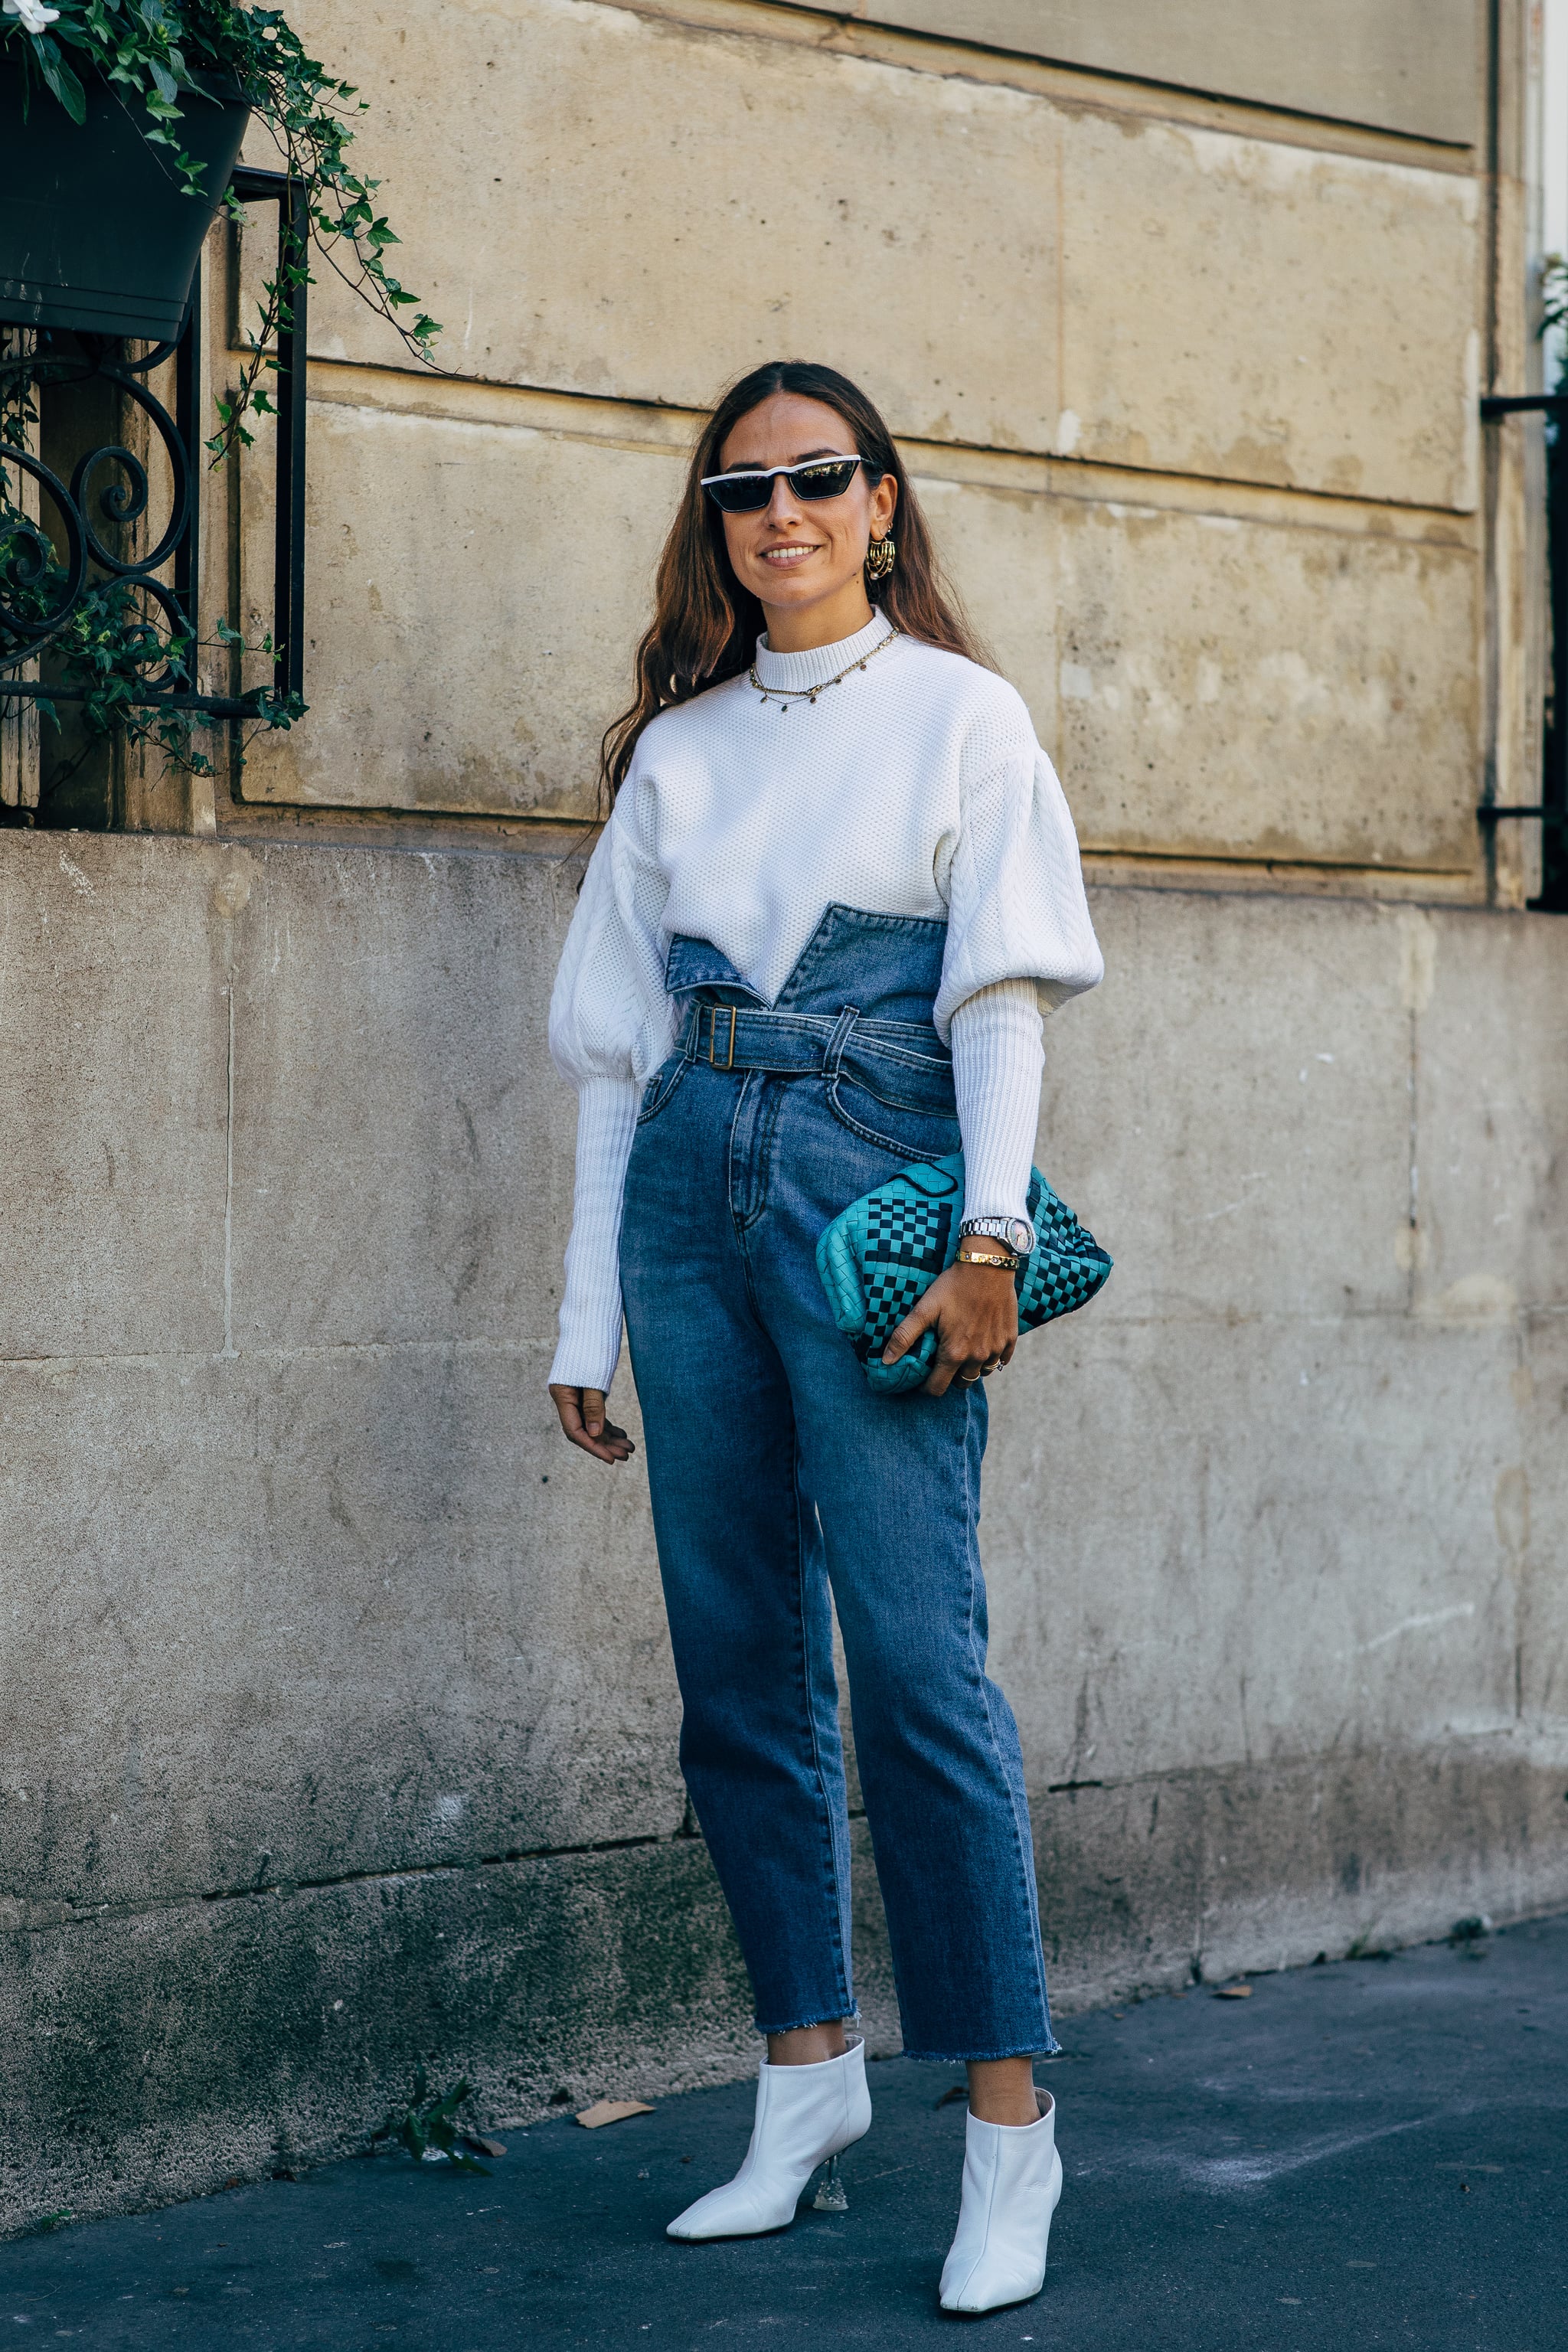 Invest in high-waisted denim — they're an outfit game-changer